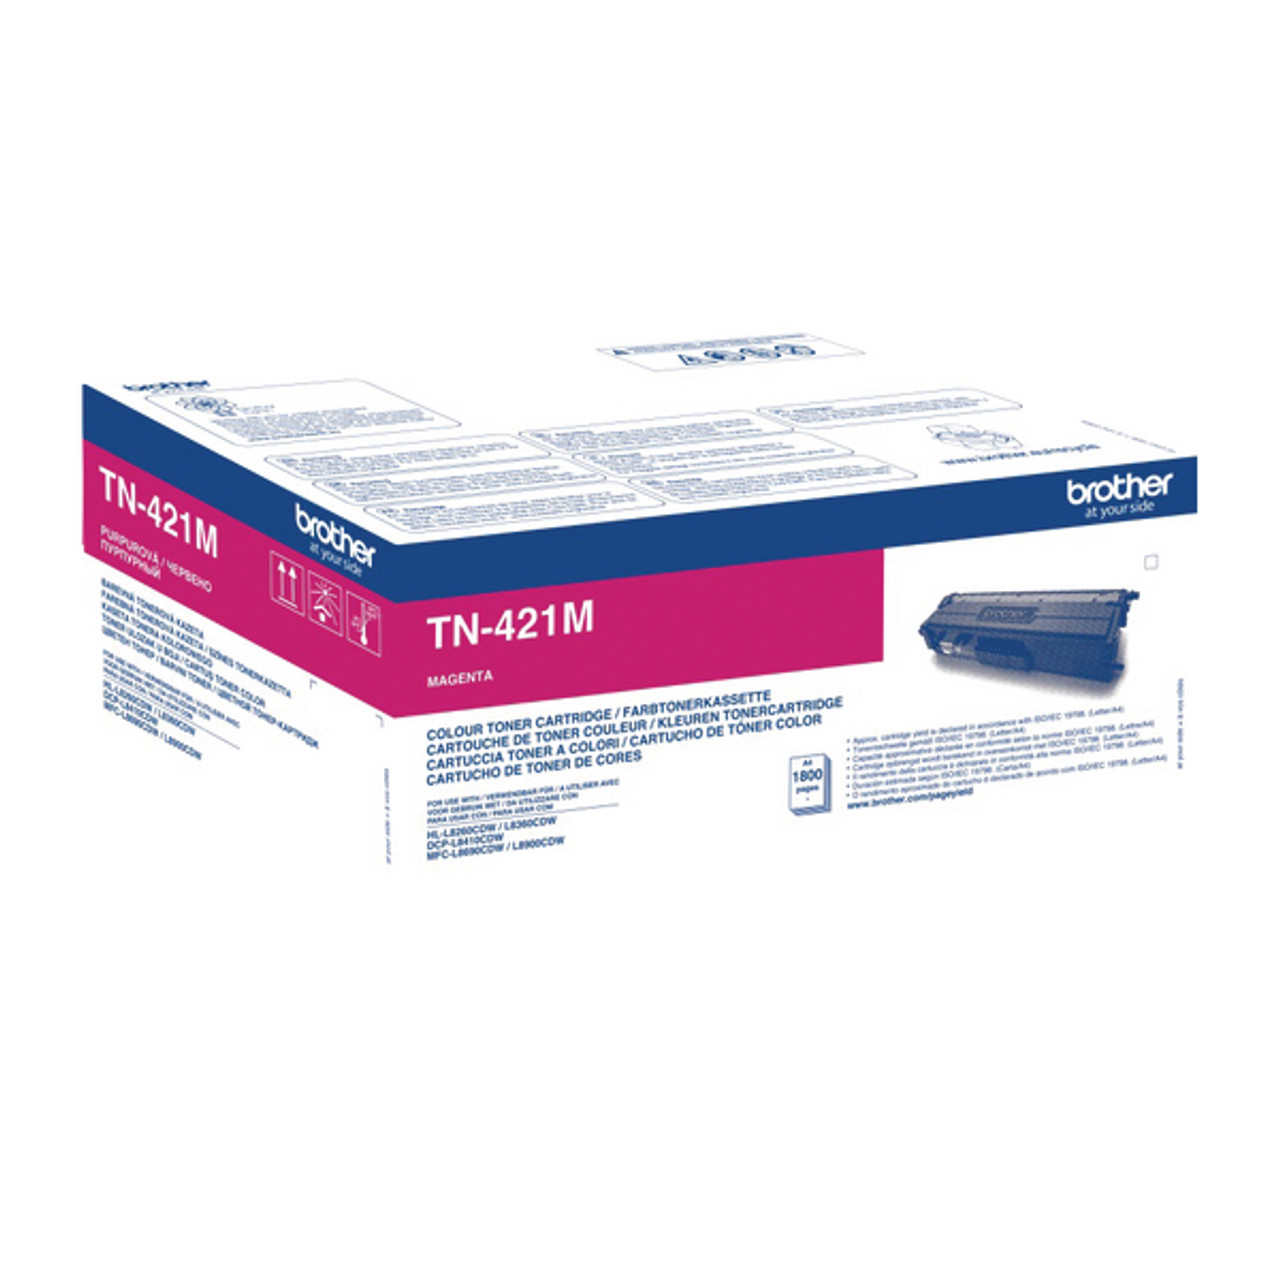 Brother TN-421 M Magenta Toner - 9to5 Supplies